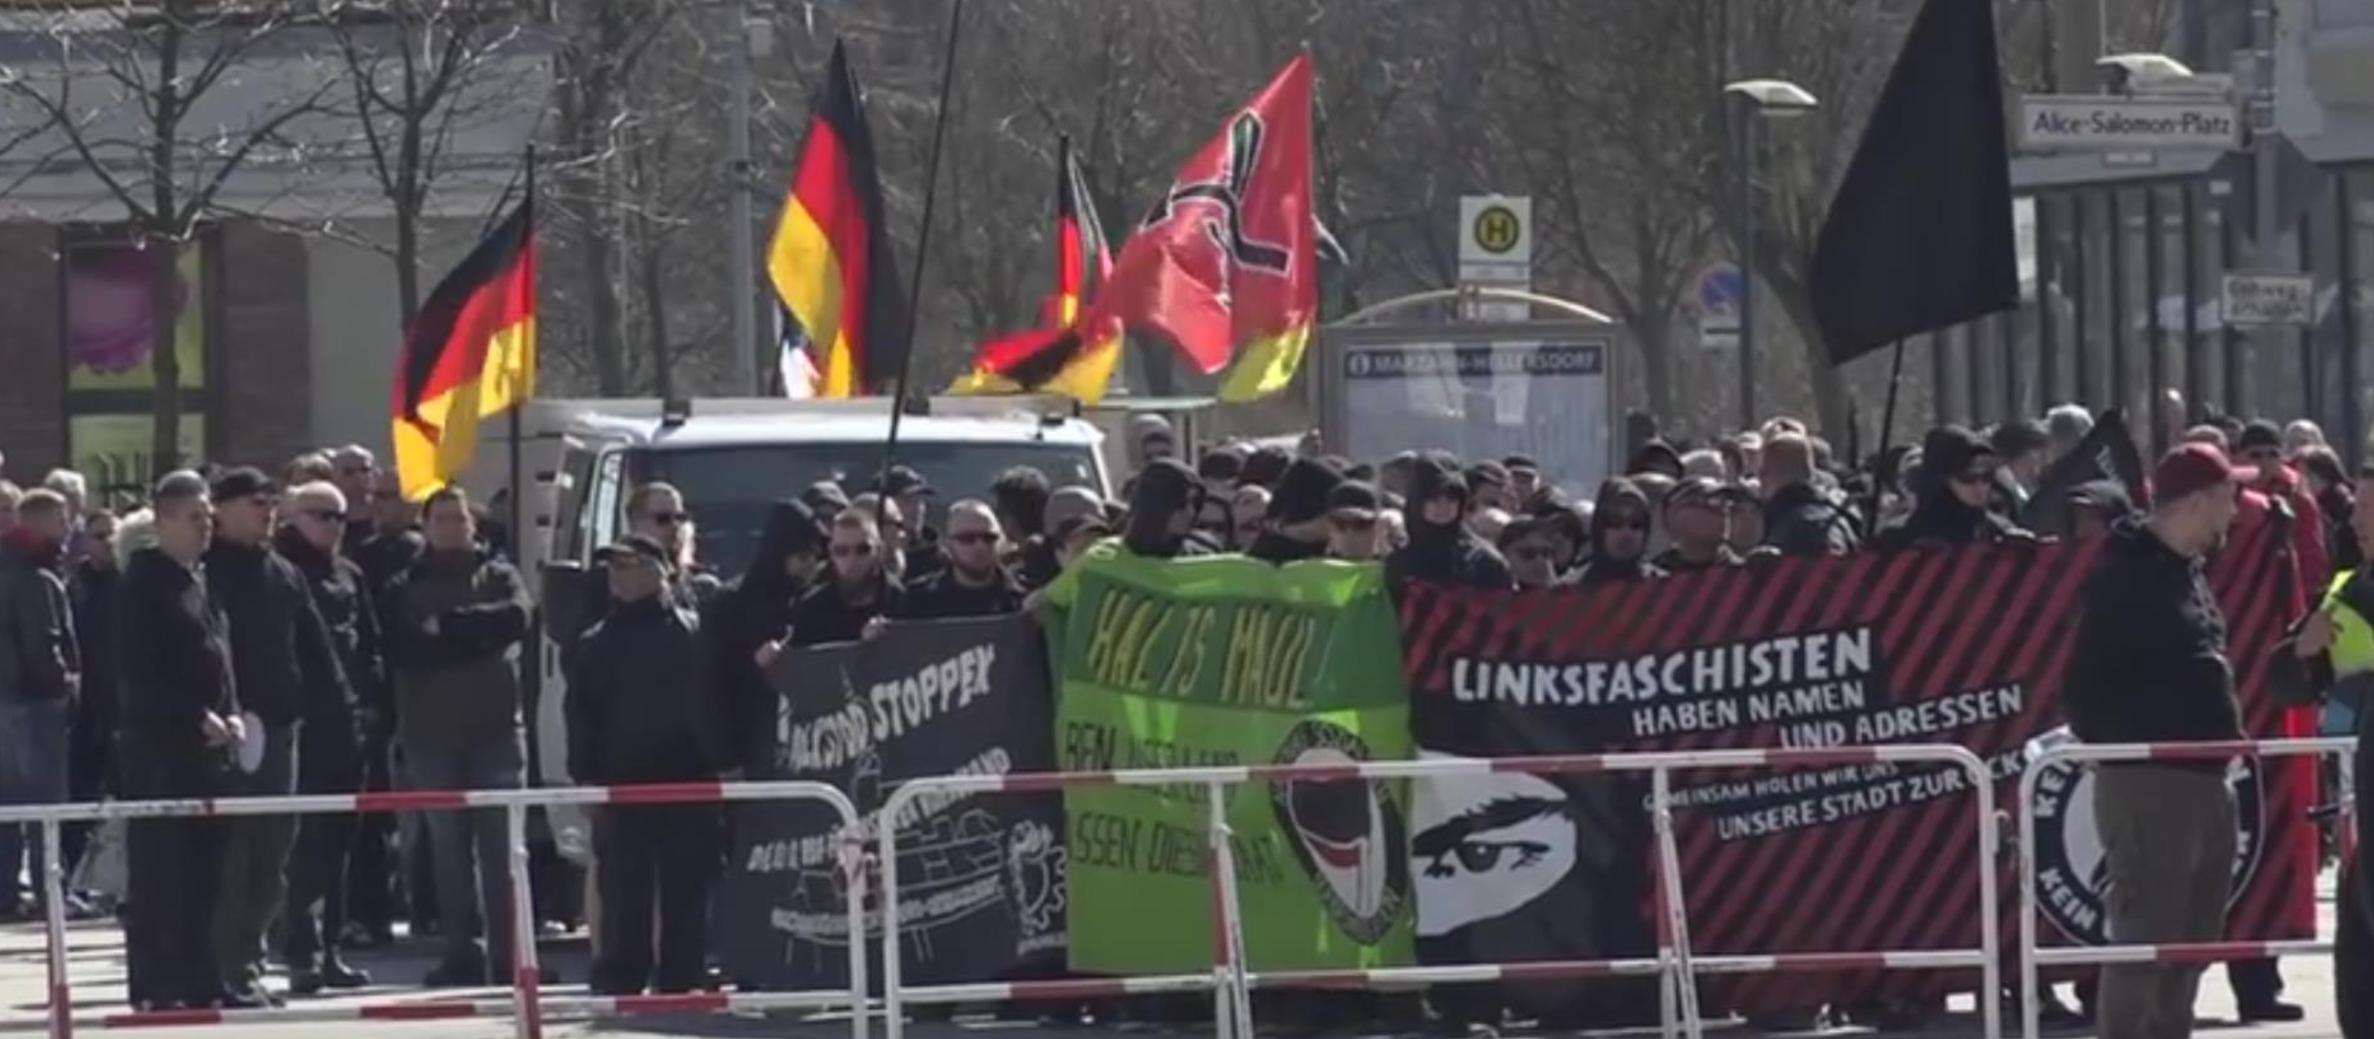 Berlin neo-Nazi demo largely targets Jews with chants of “Never again Israel”